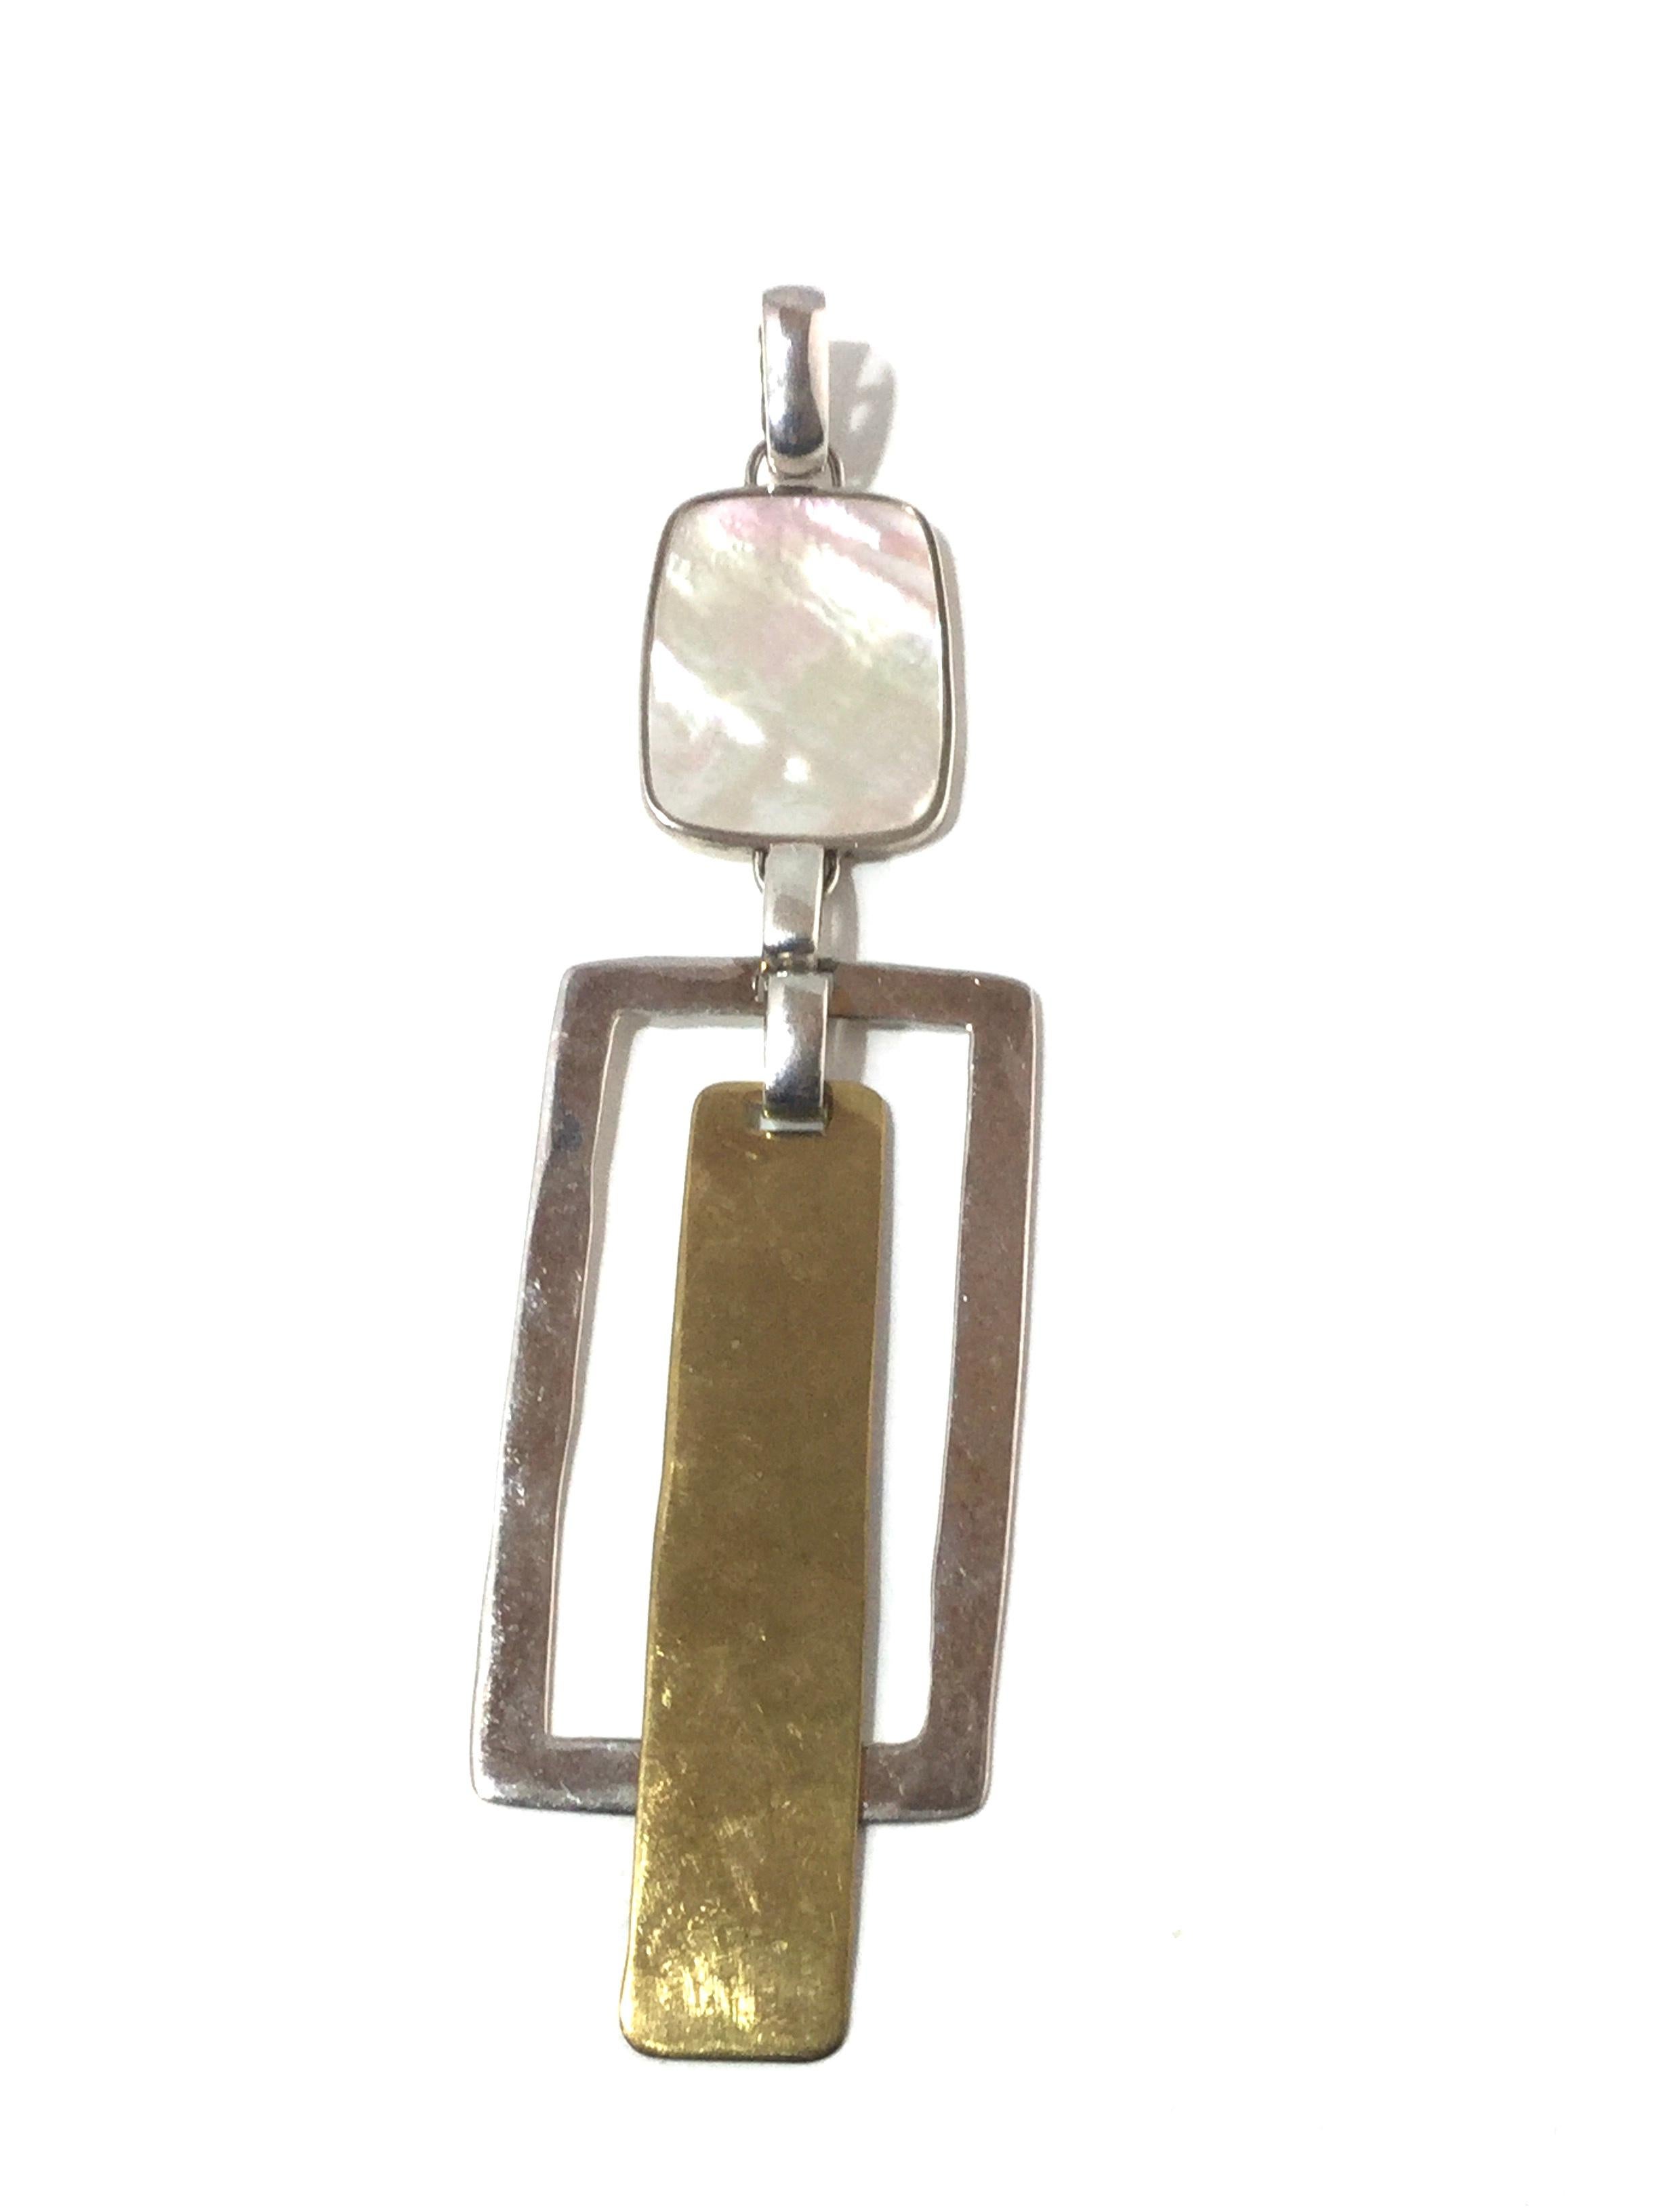 Robert Lee Morris Sterling Silver, Brass and Mother of Pearl Dangle Pendant

Robert Lee Morris Studio modernist pendant, sterling silver, brass & mother of pearl composed of rectangular shapes connected together by links. The bale has a clasp to